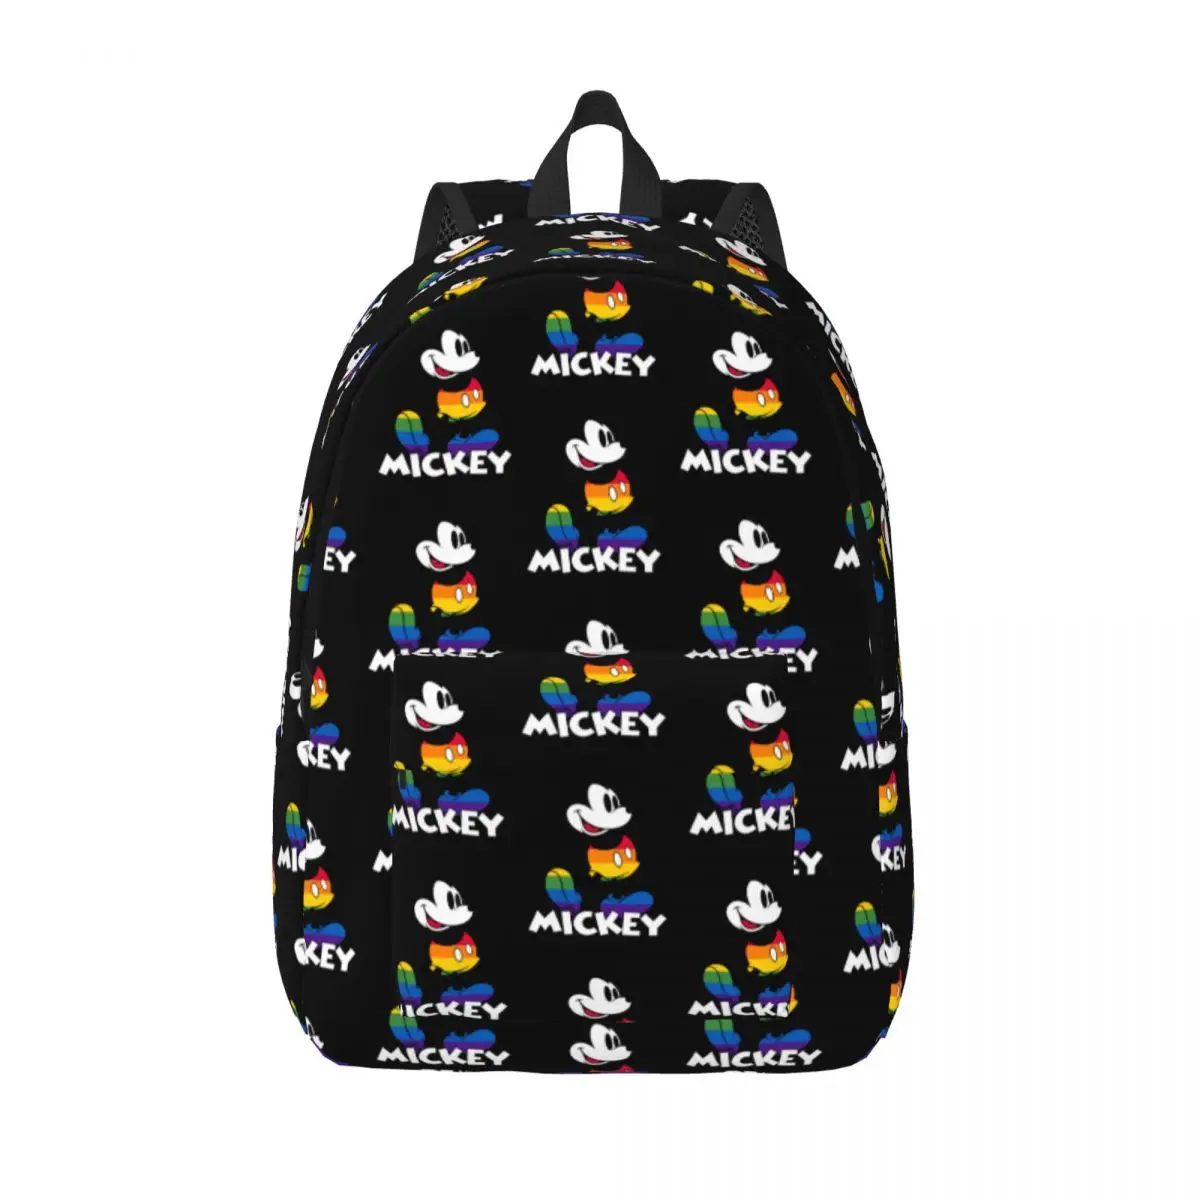 Classic Mickey Rainbow Stripes Backpack for Men Women Casual Student Work Daypack Laptop Computer Canvas Bags Gift